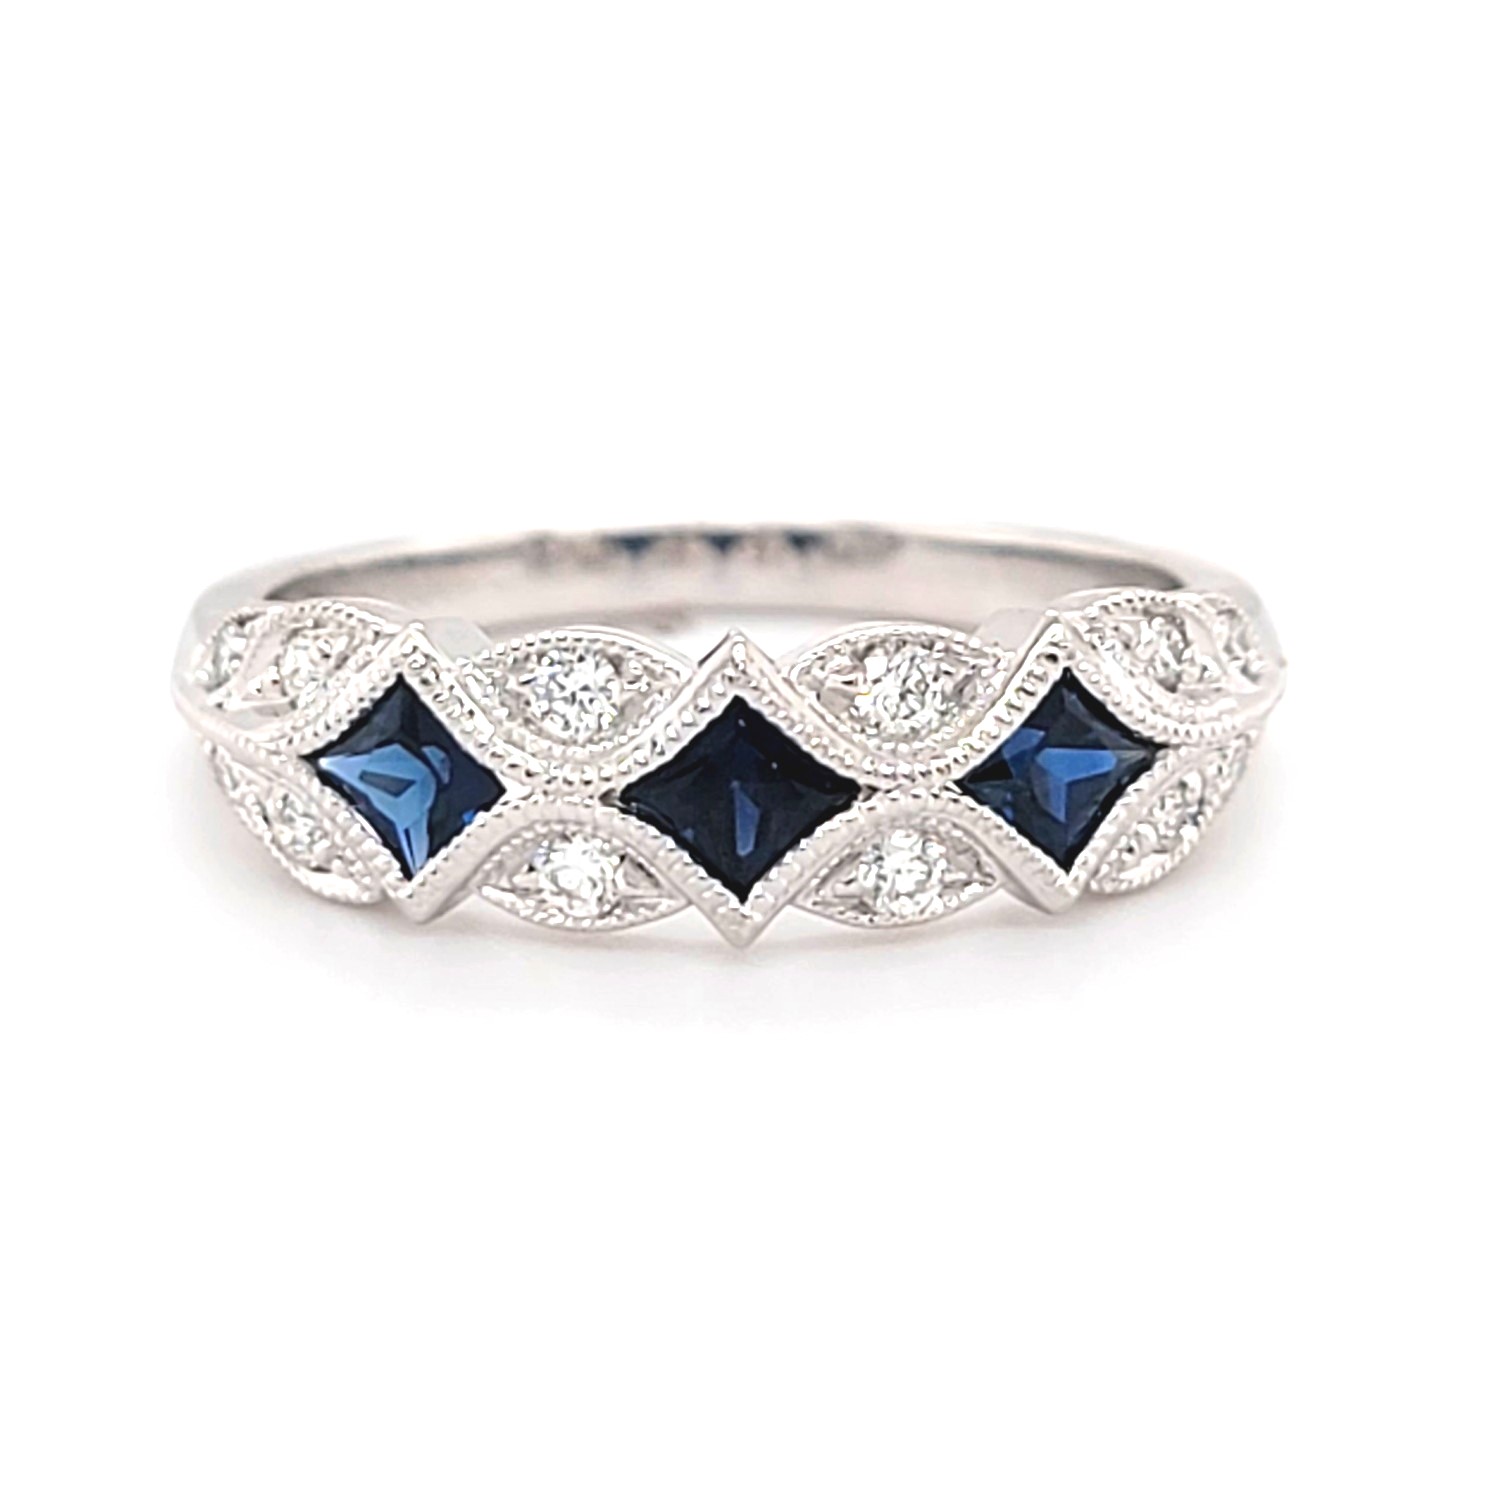 2.15ct Blue Sapphire and 5.24ct Diamond Ring in 18K White Gold